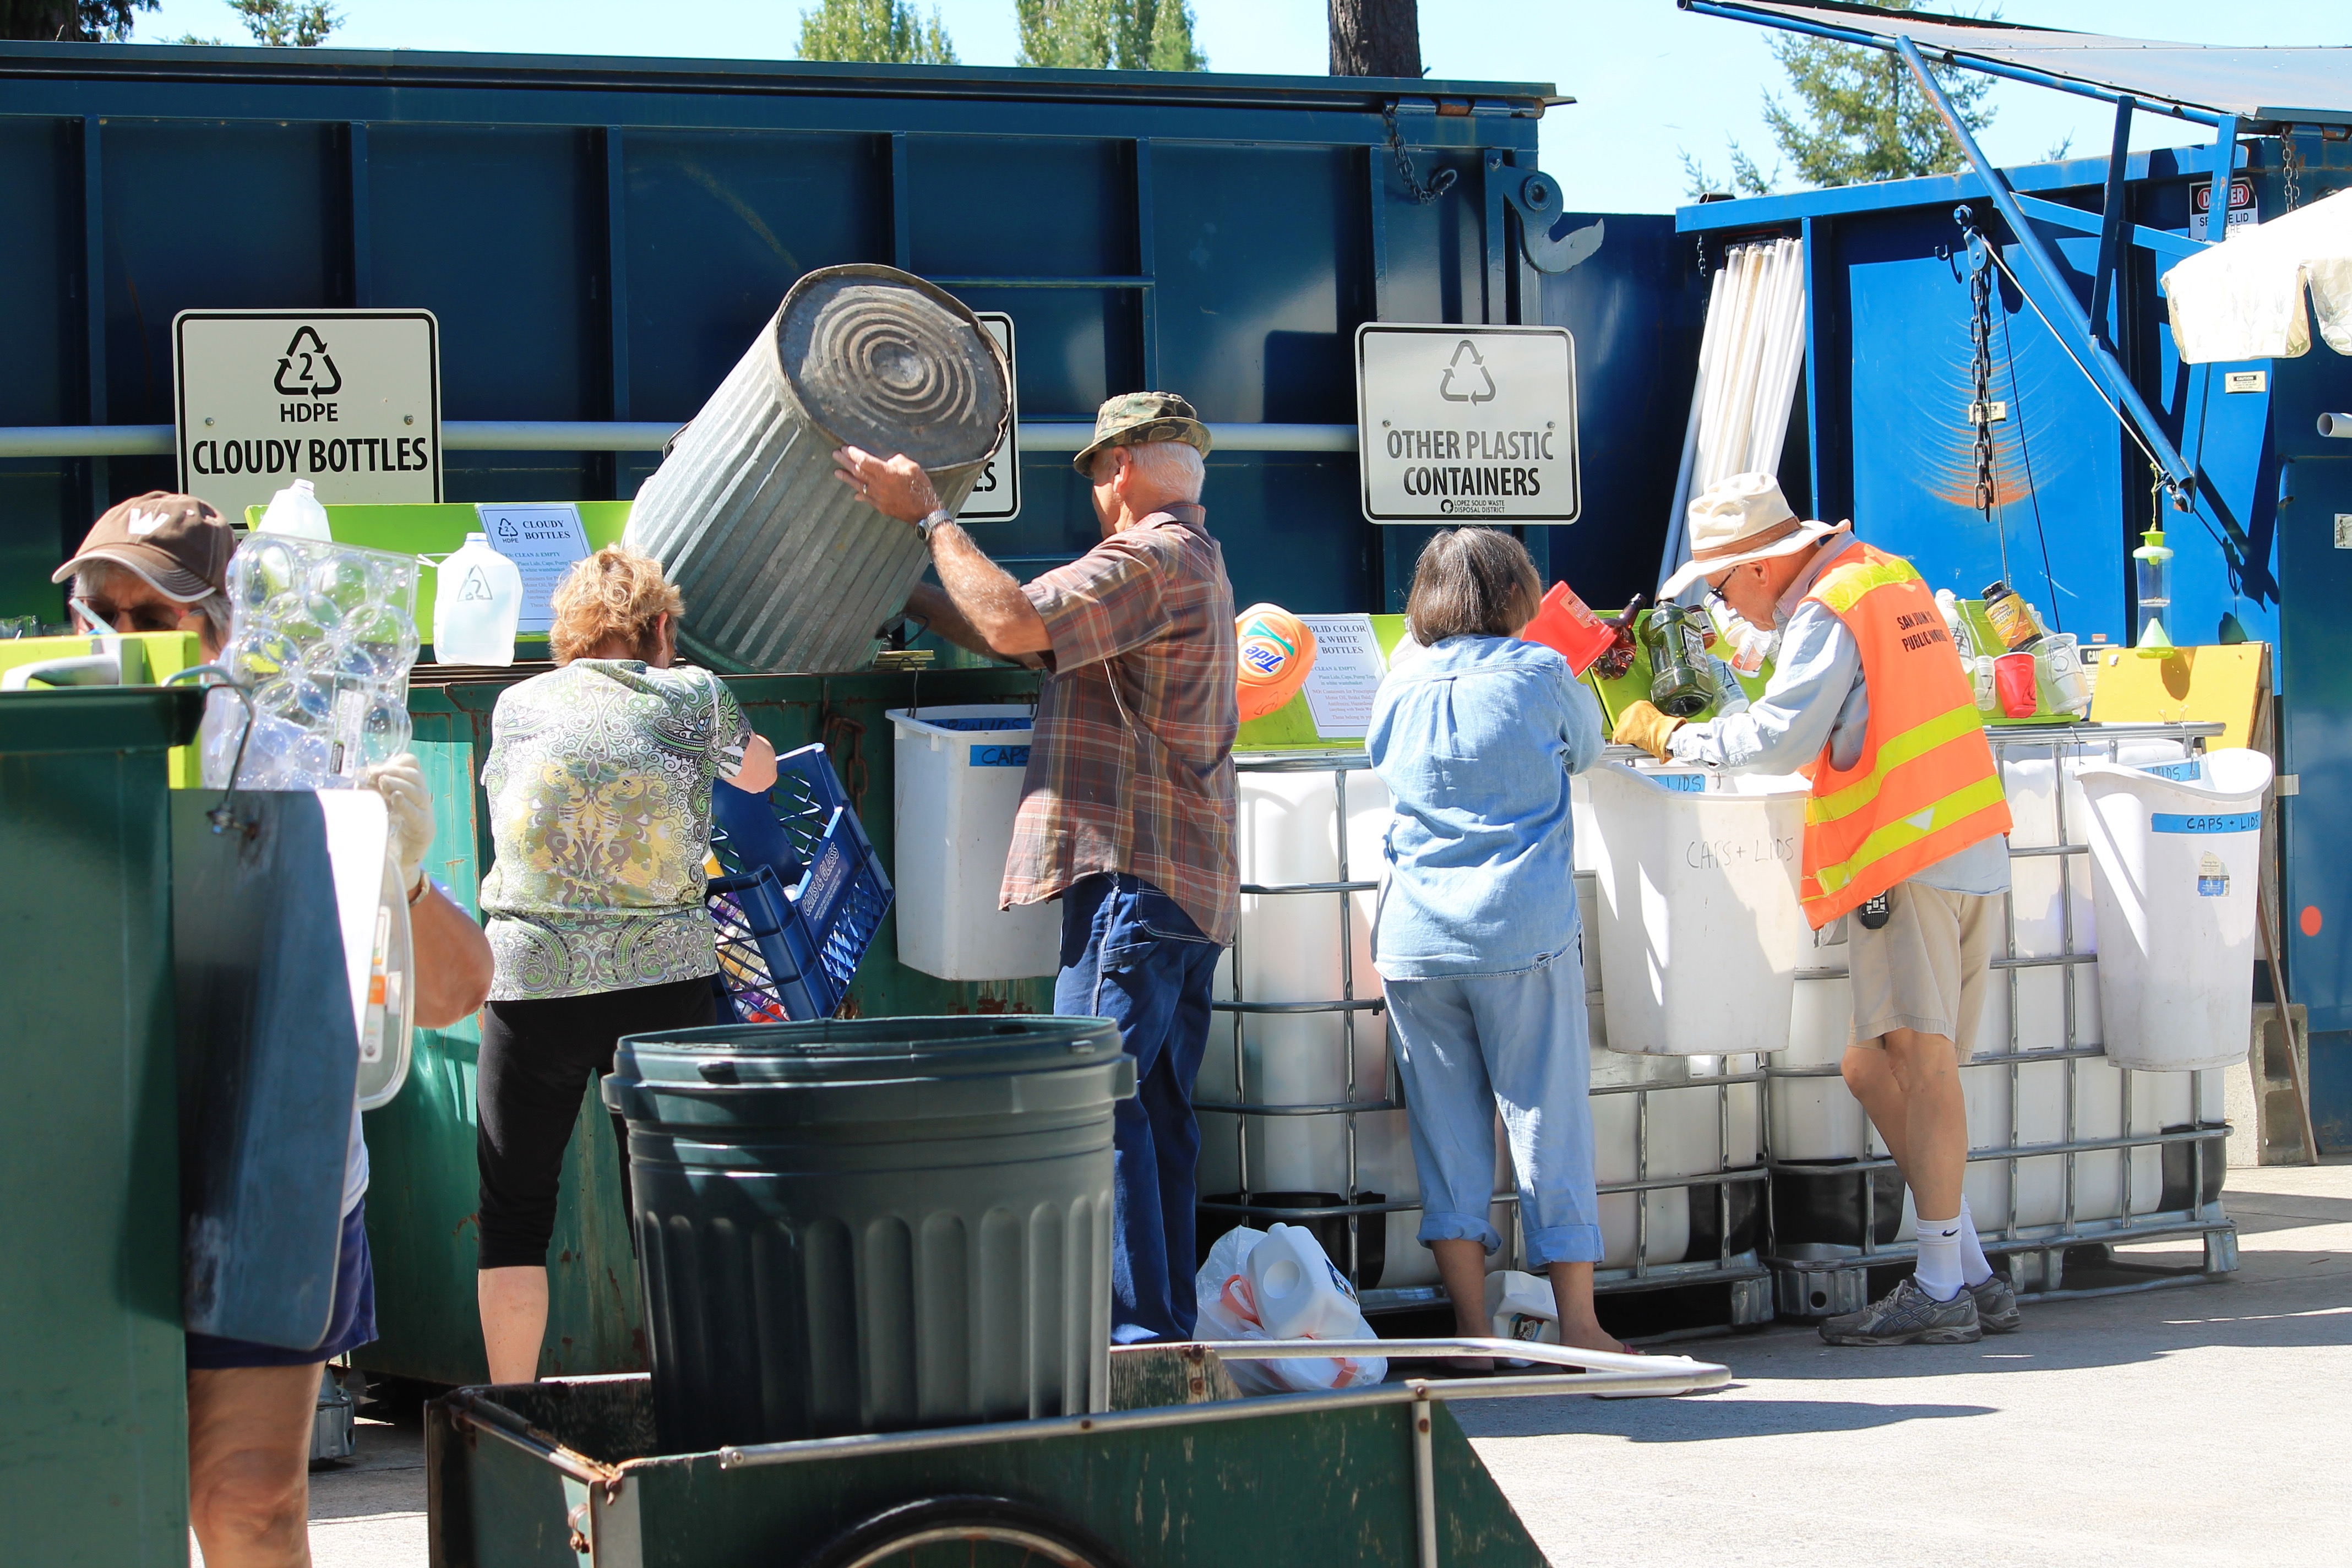 lopez island solid waste district fundraiser recycle reuse repurpose transfer station